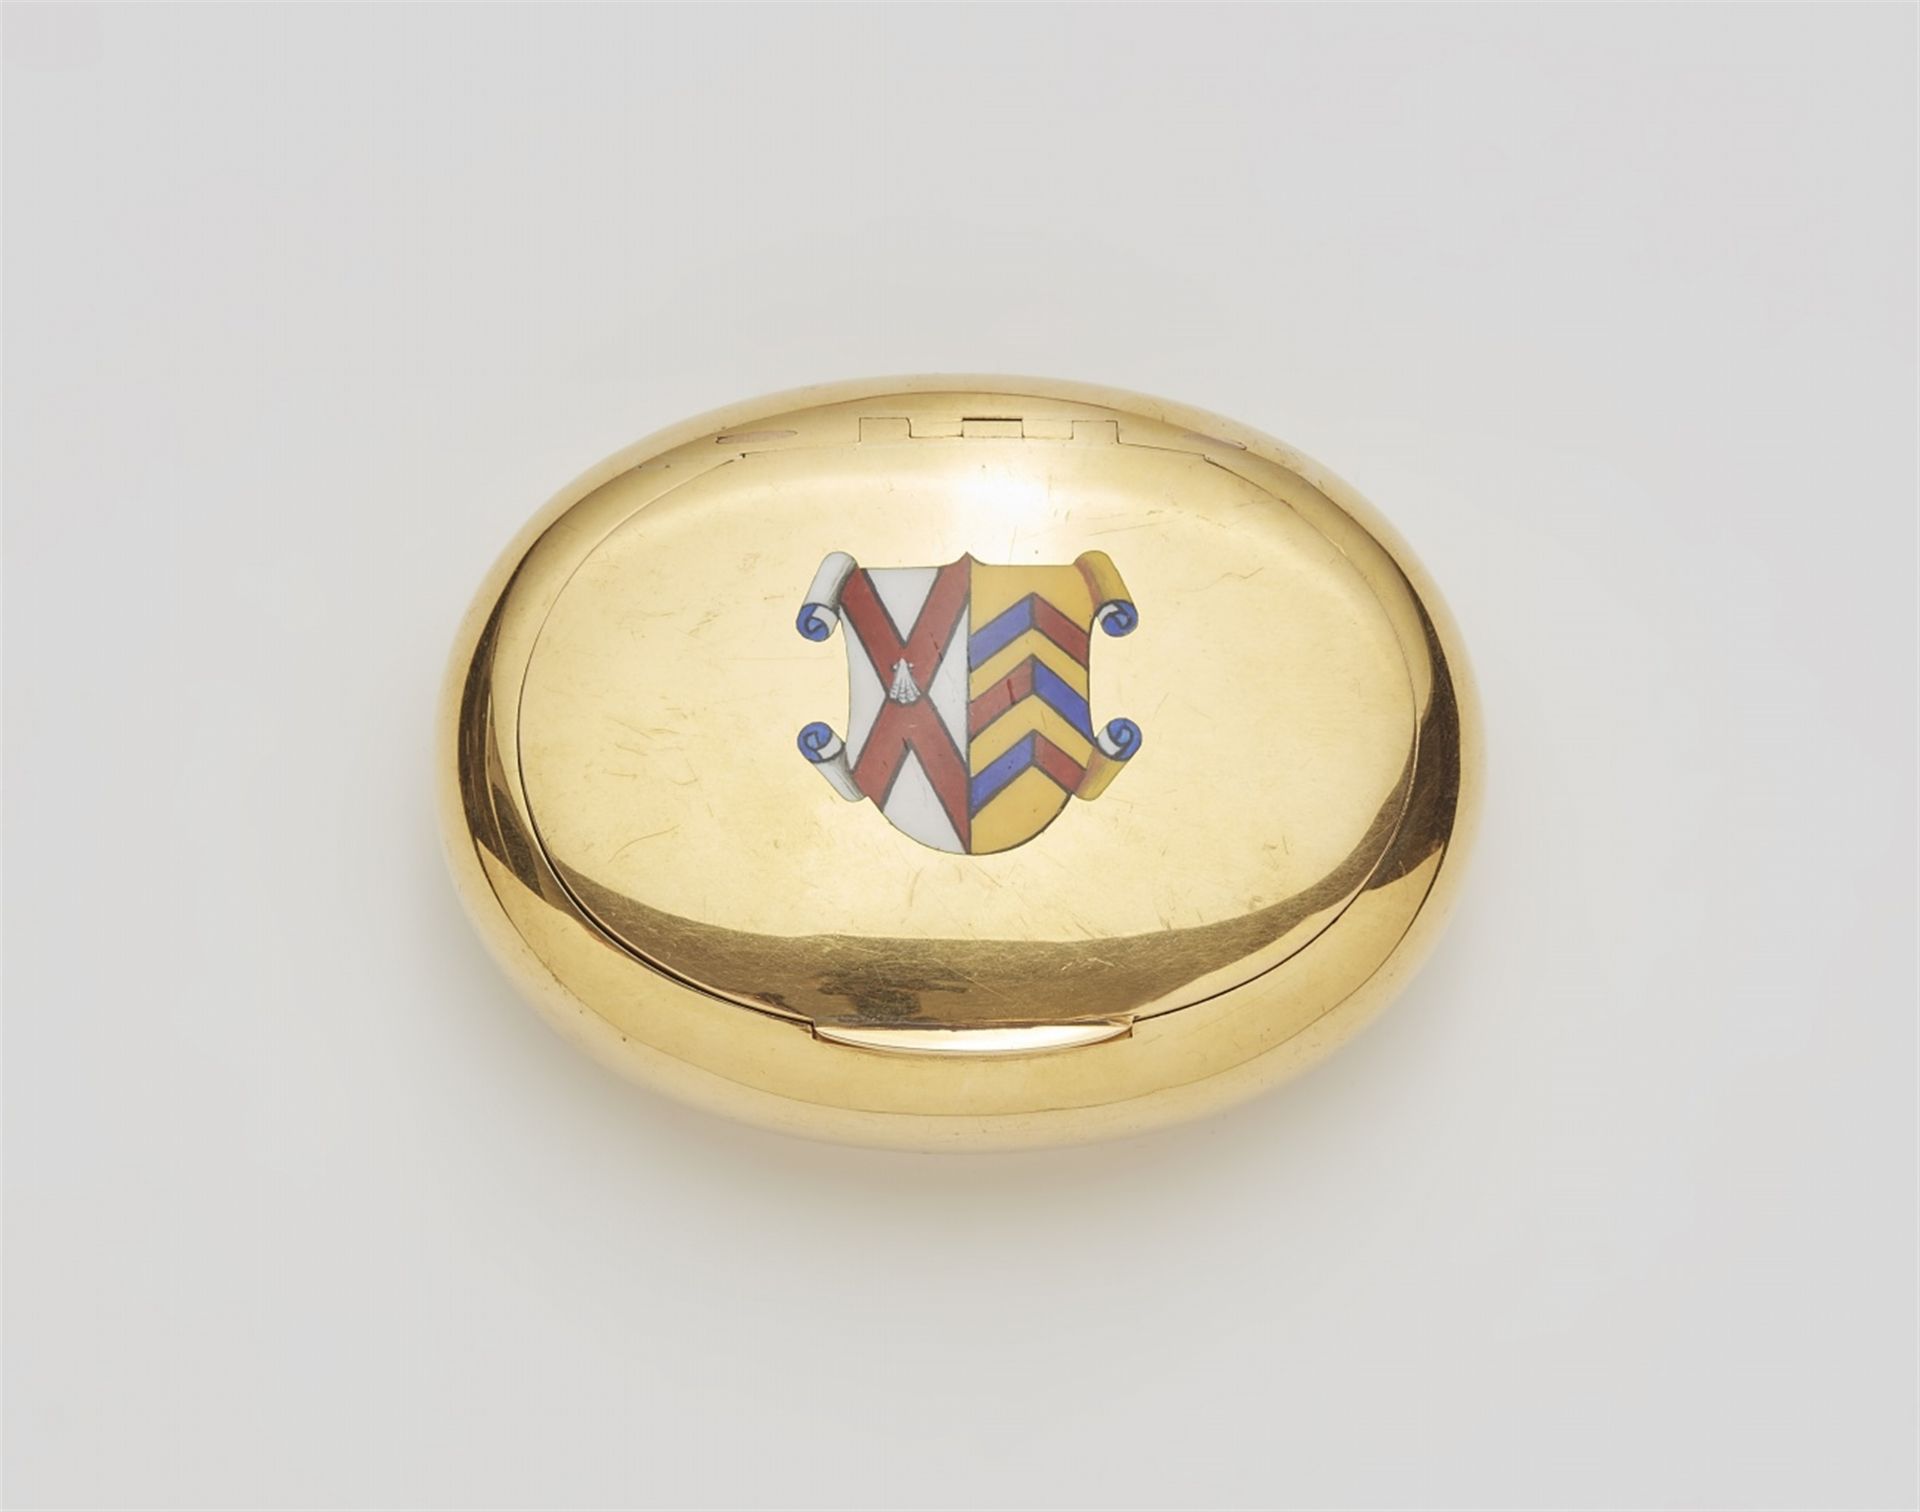 An 18k gold snuff box with an enamelled crest